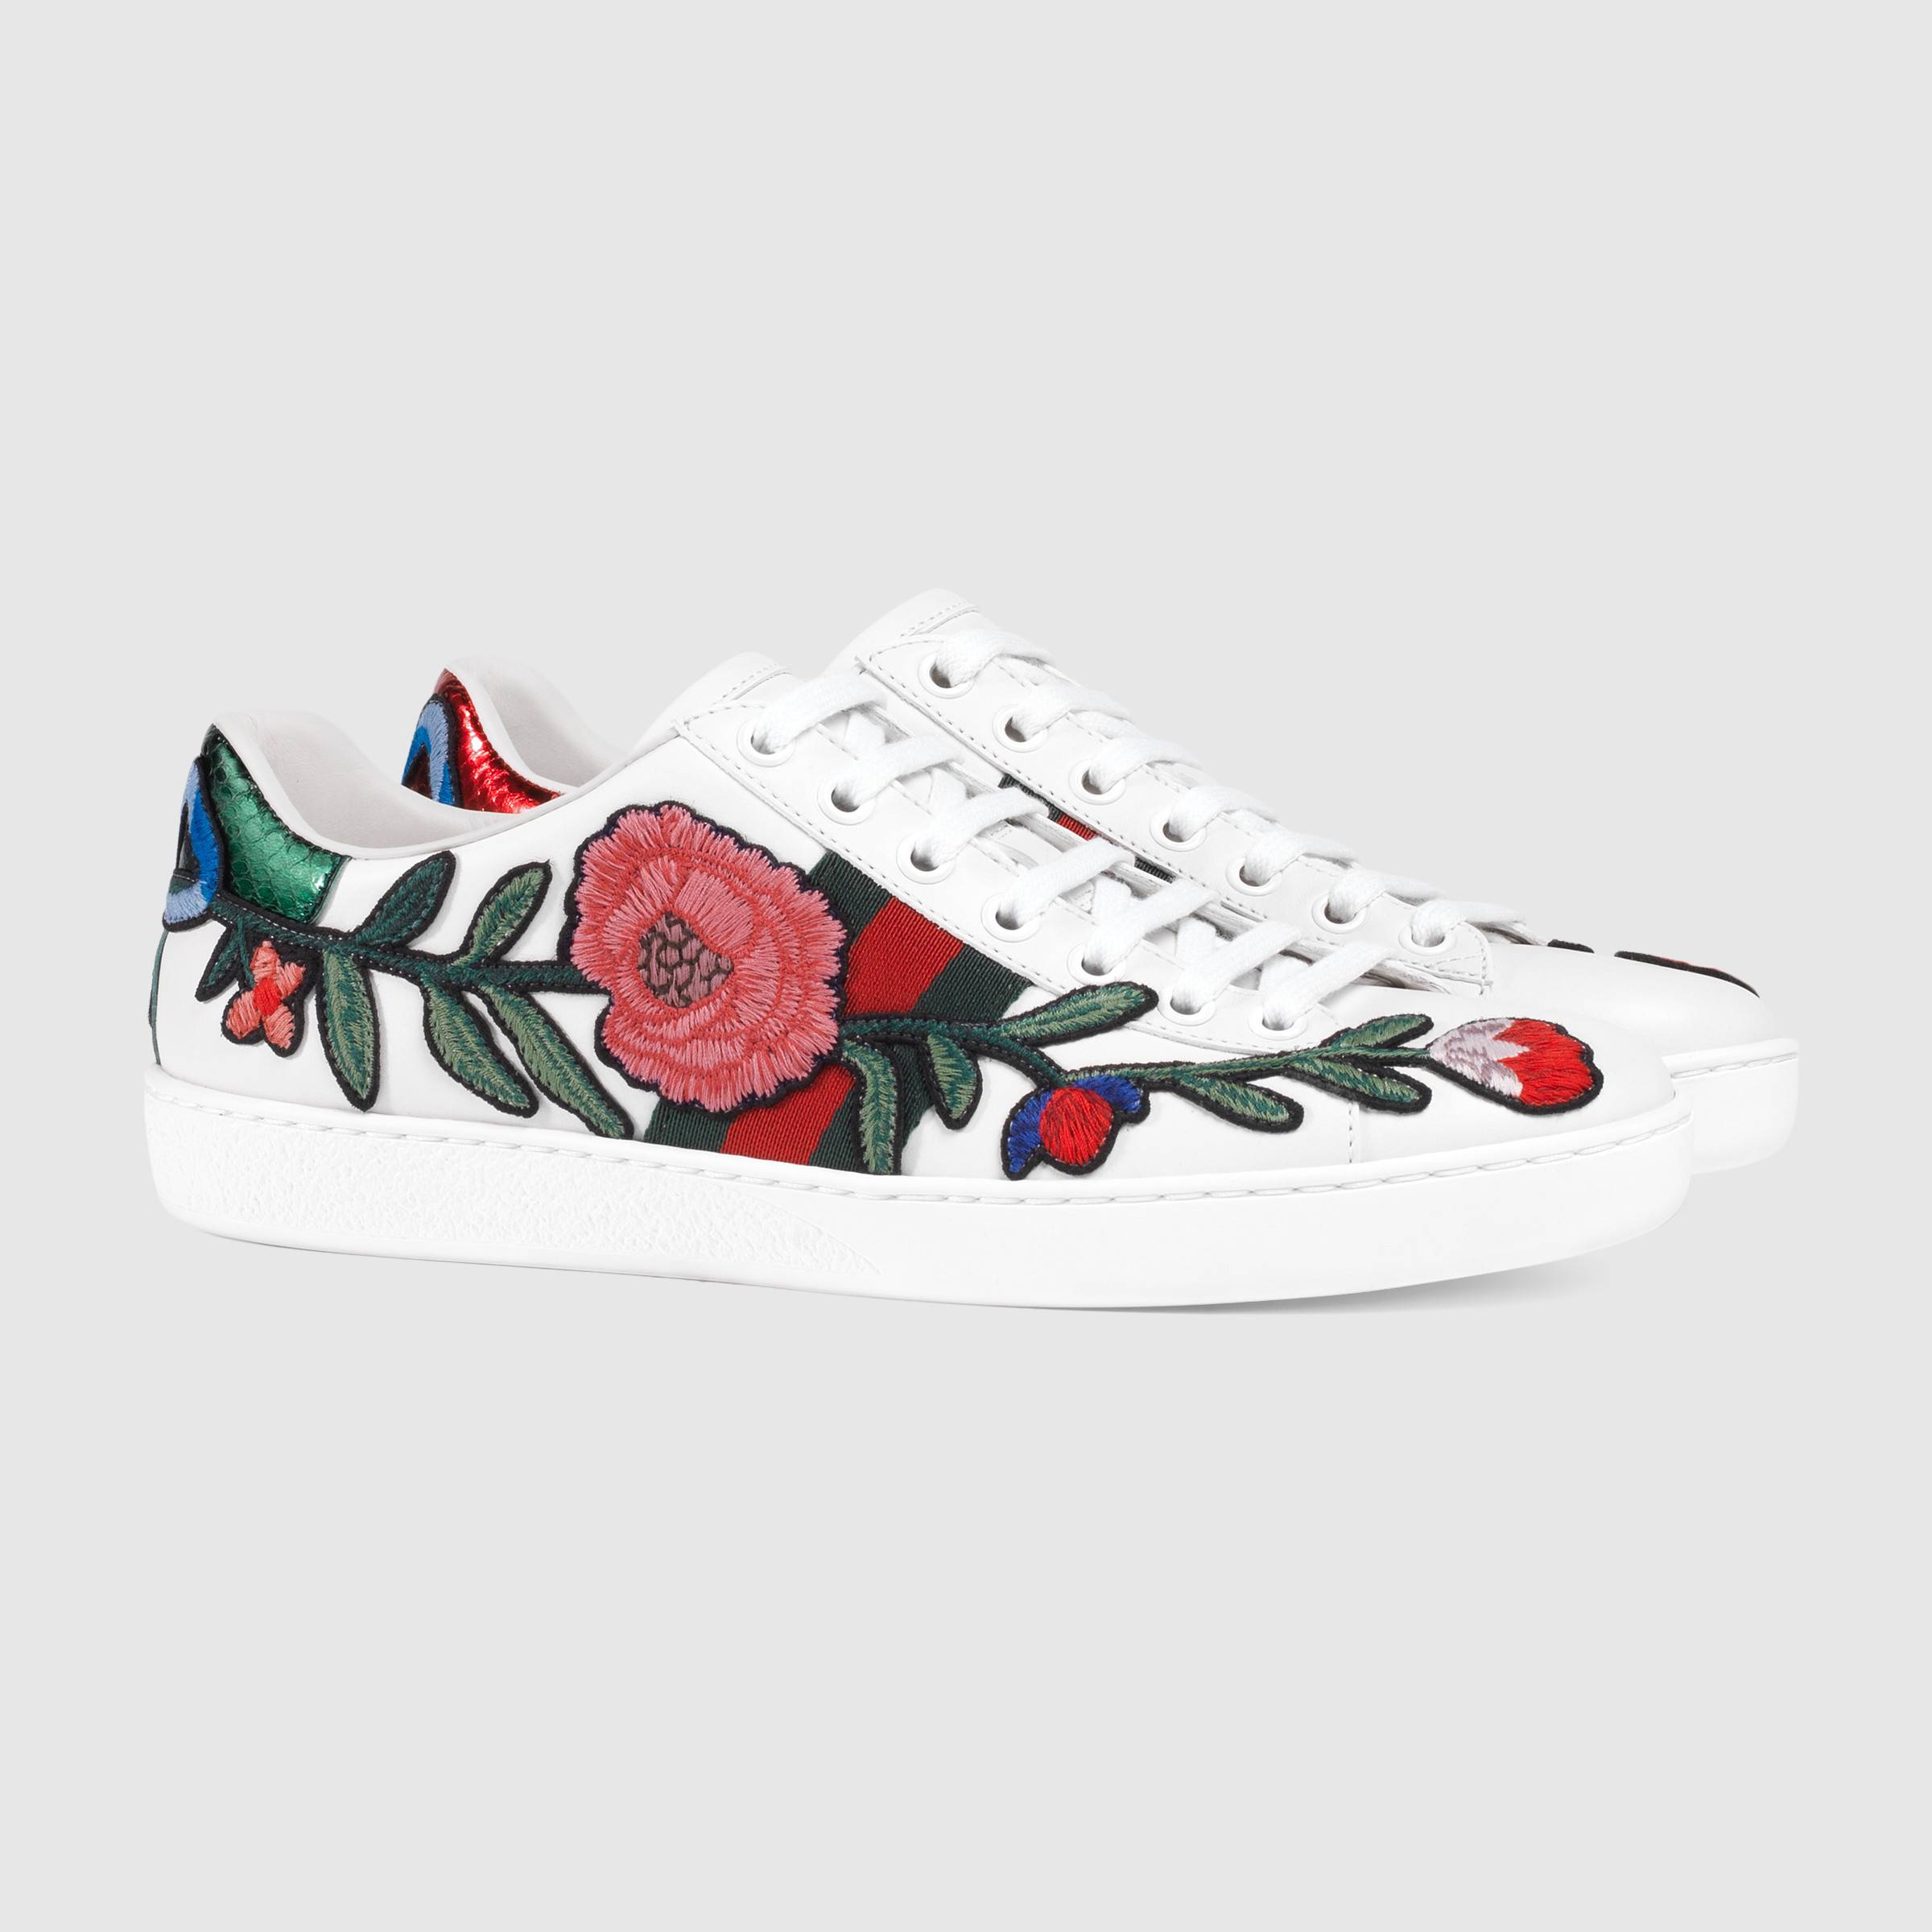 Ace embroidered sneaker_Foral_03